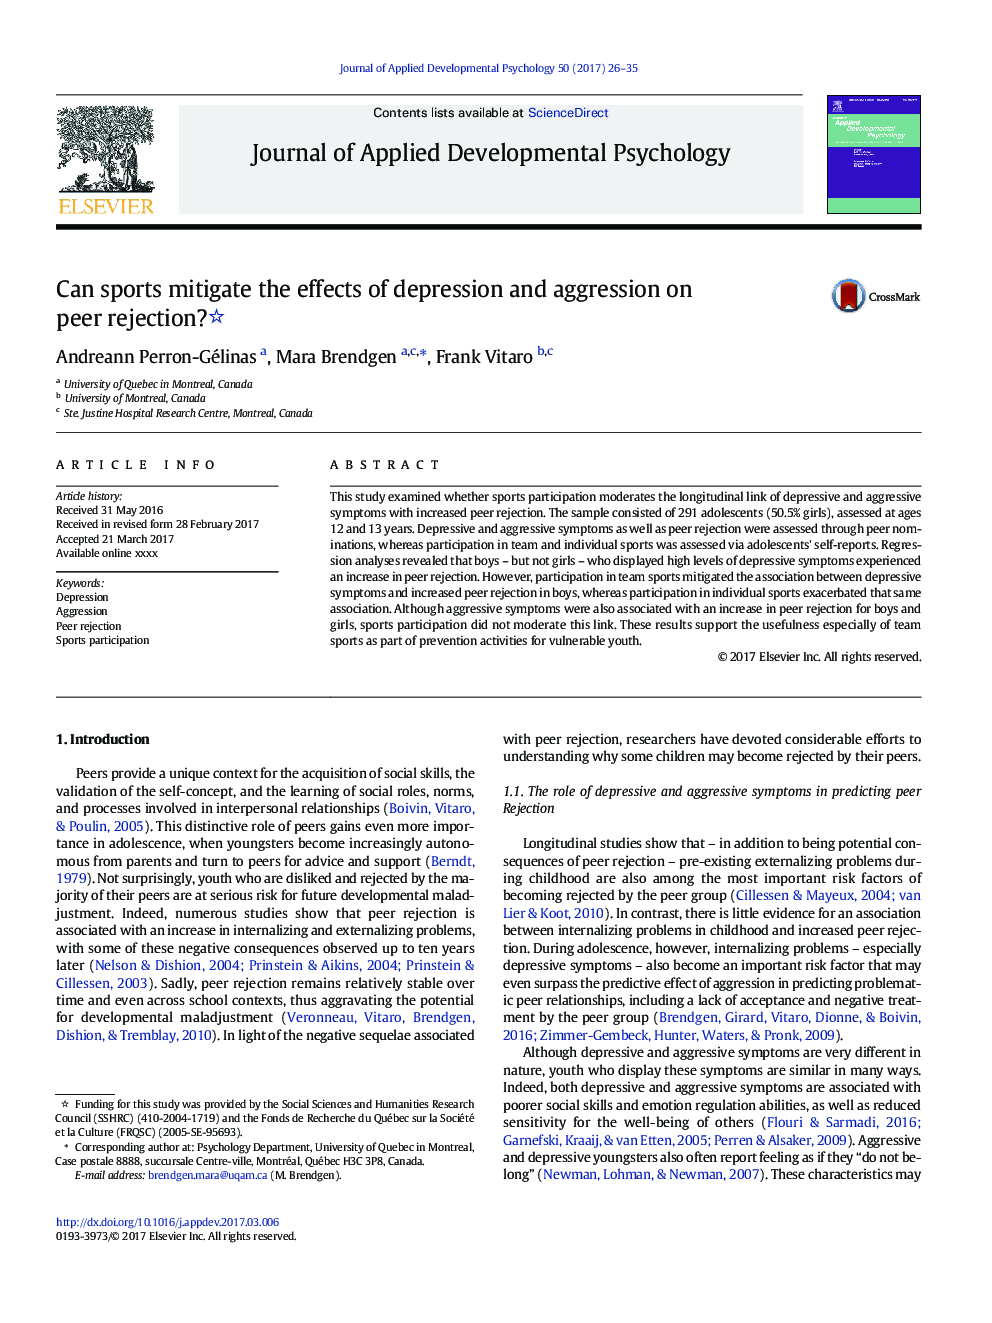 Can sports mitigate the effects of depression and aggression on peer rejection?